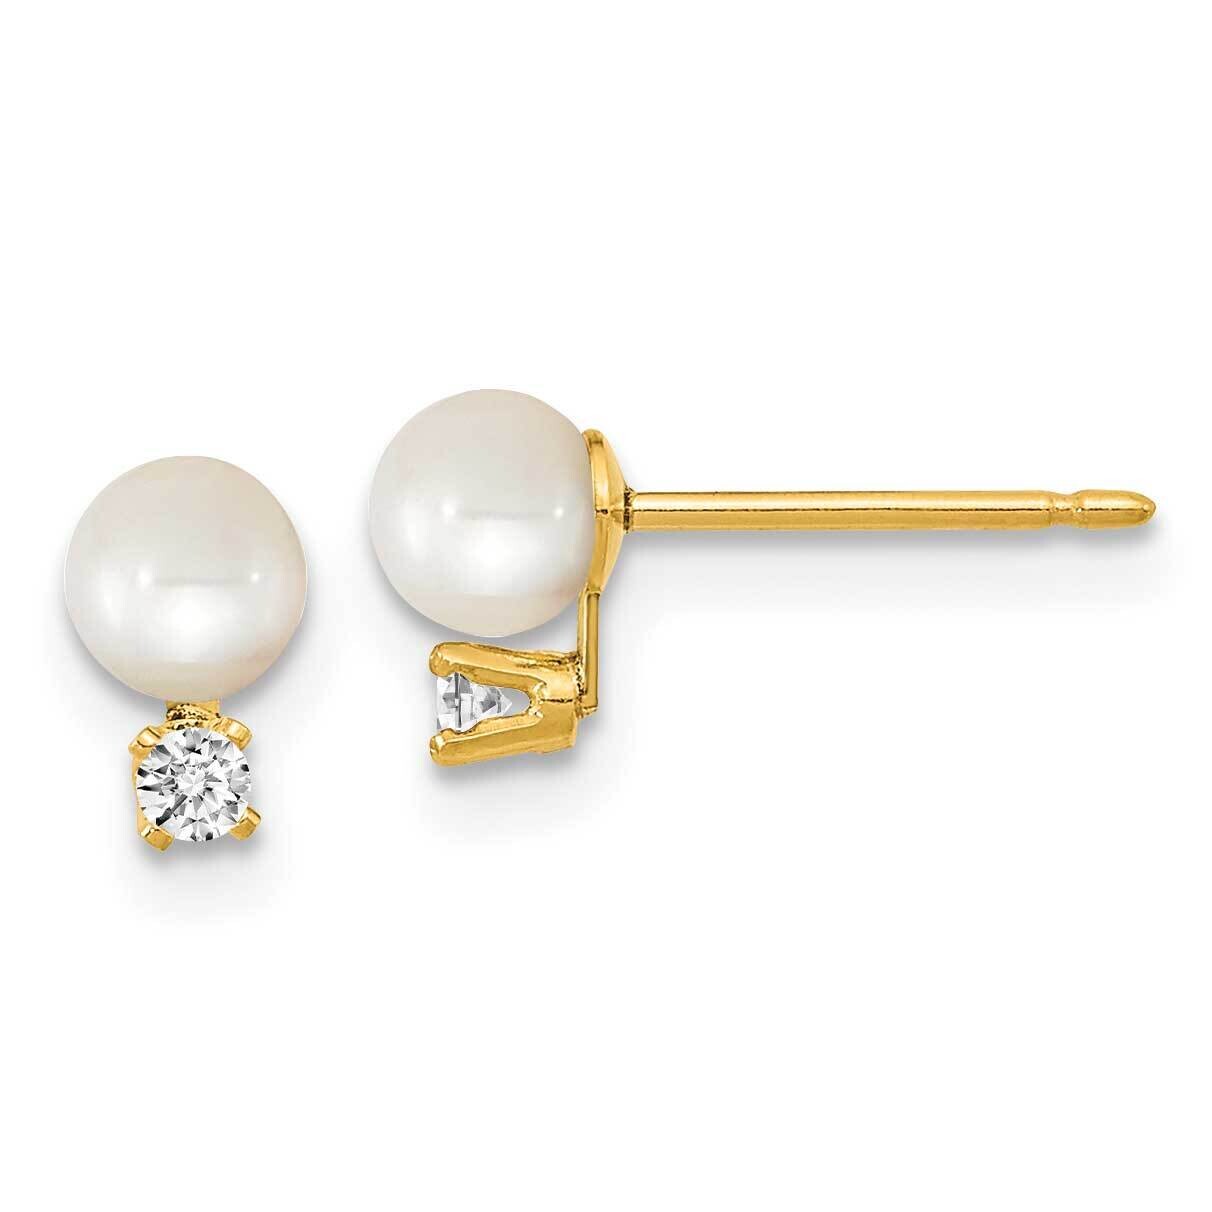 3-3.5mm Cultured Pearl & .04 ct. Diamond Post Earring Mounting 14k Gold XD21